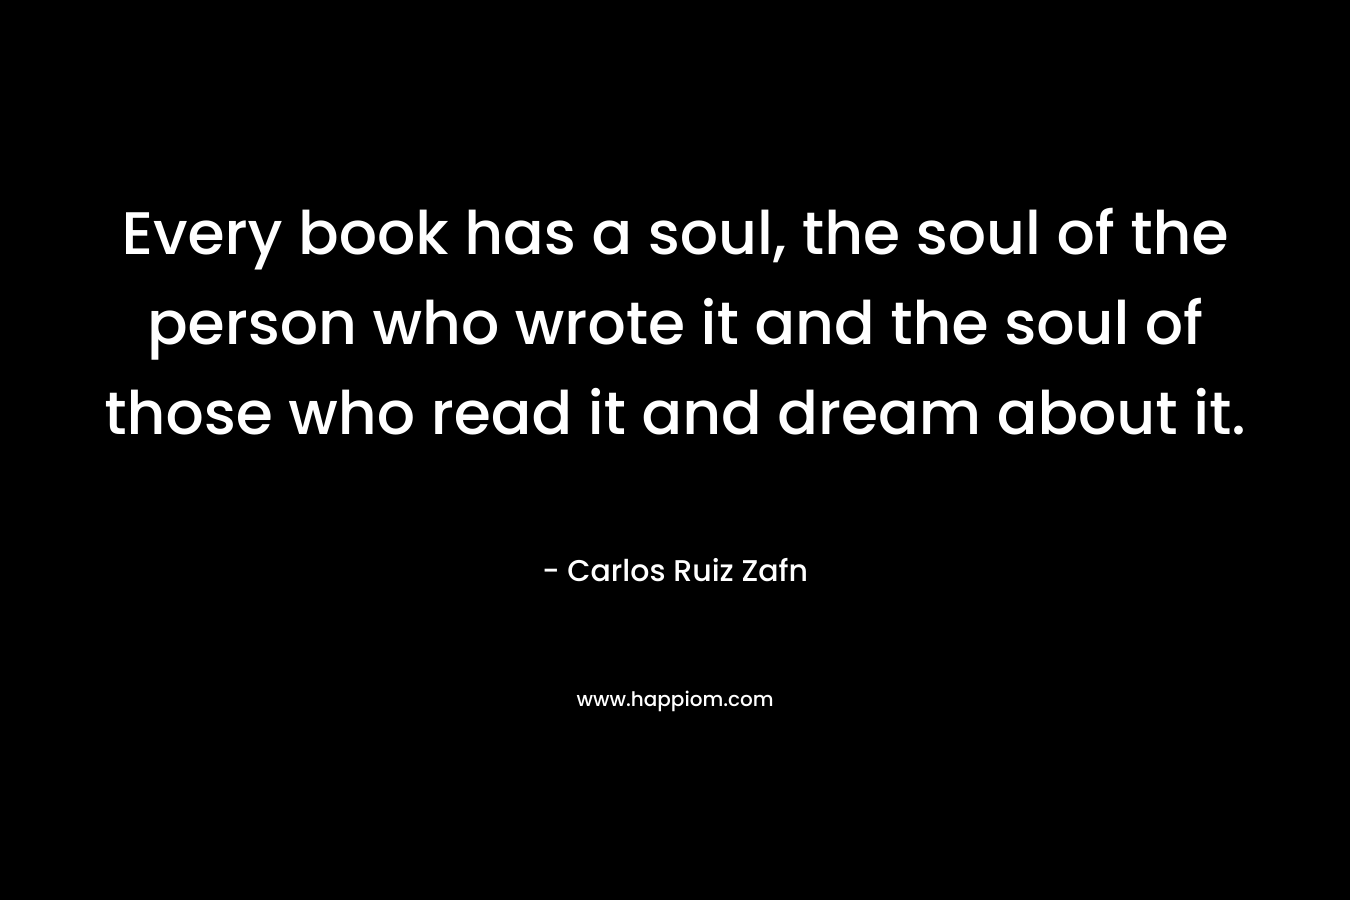 Every book has a soul, the soul of the person who wrote it and the soul of those who read it and dream about it.